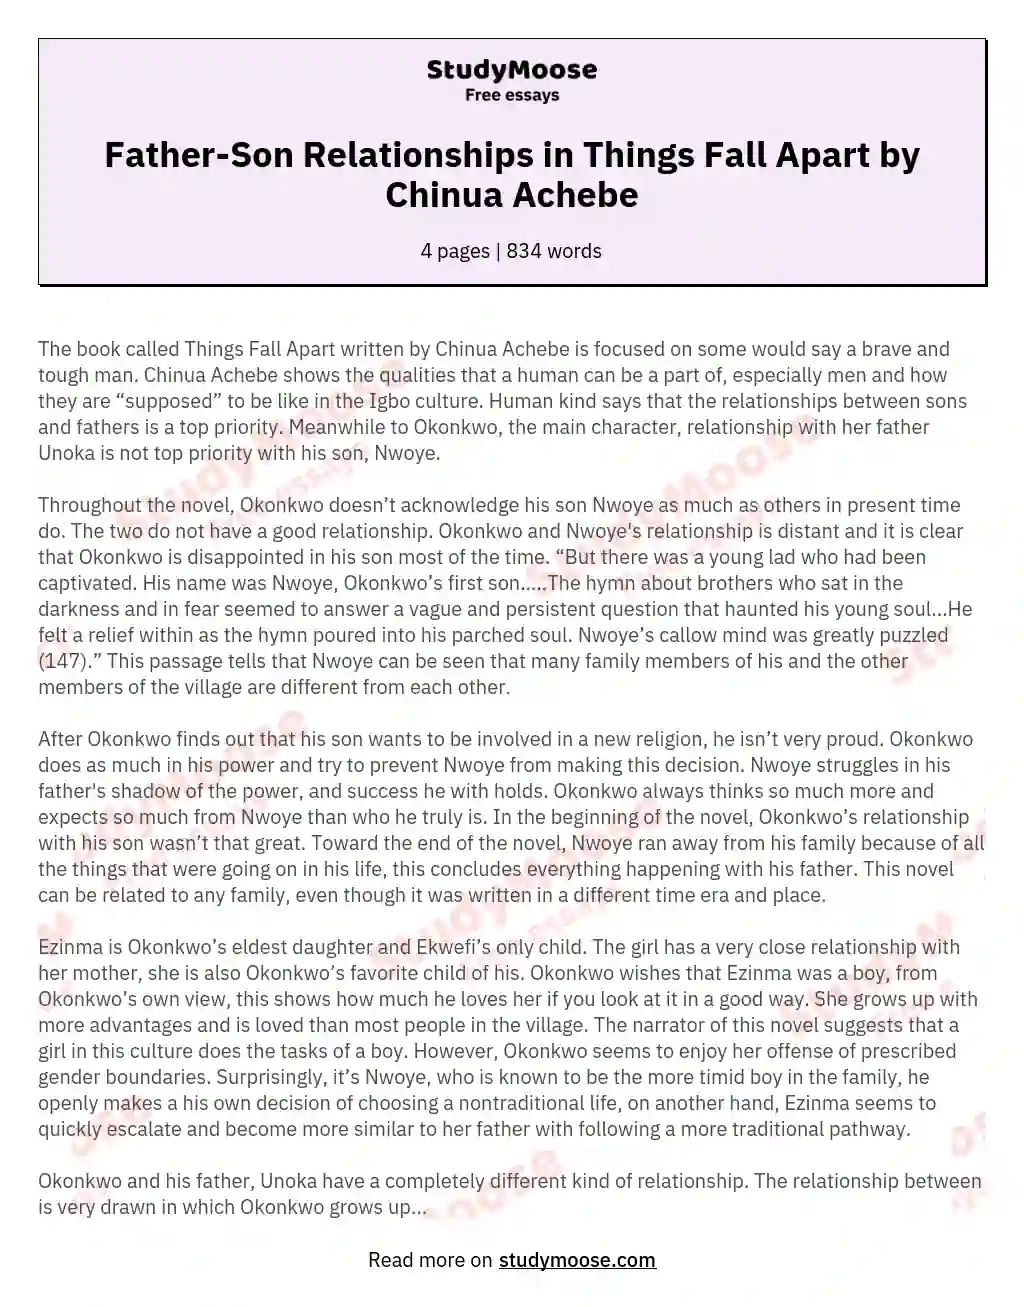 Father-Son Relationships in Things Fall Apart by Chinua Achebe essay